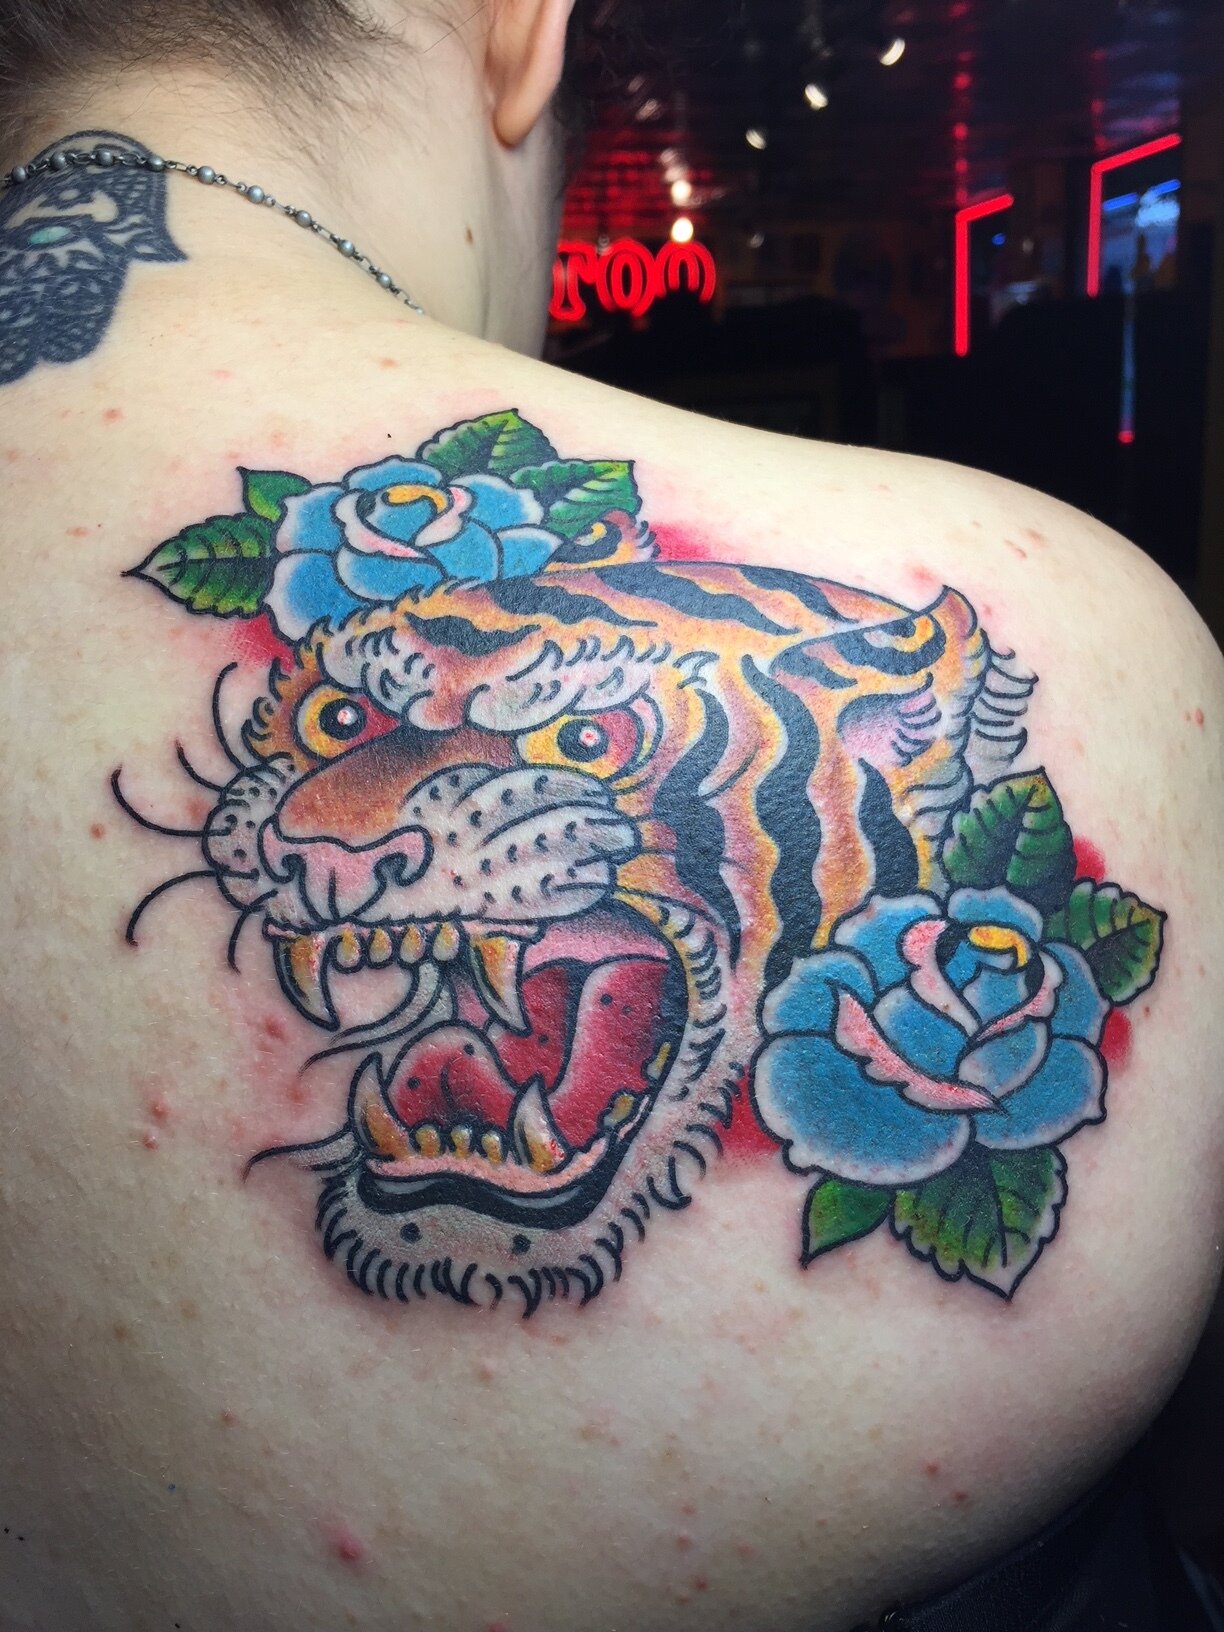 Tiger head tattoo with flowers on shoulder by Brian Gattis at Southern Star Tattoo in Atlanta, Georgia